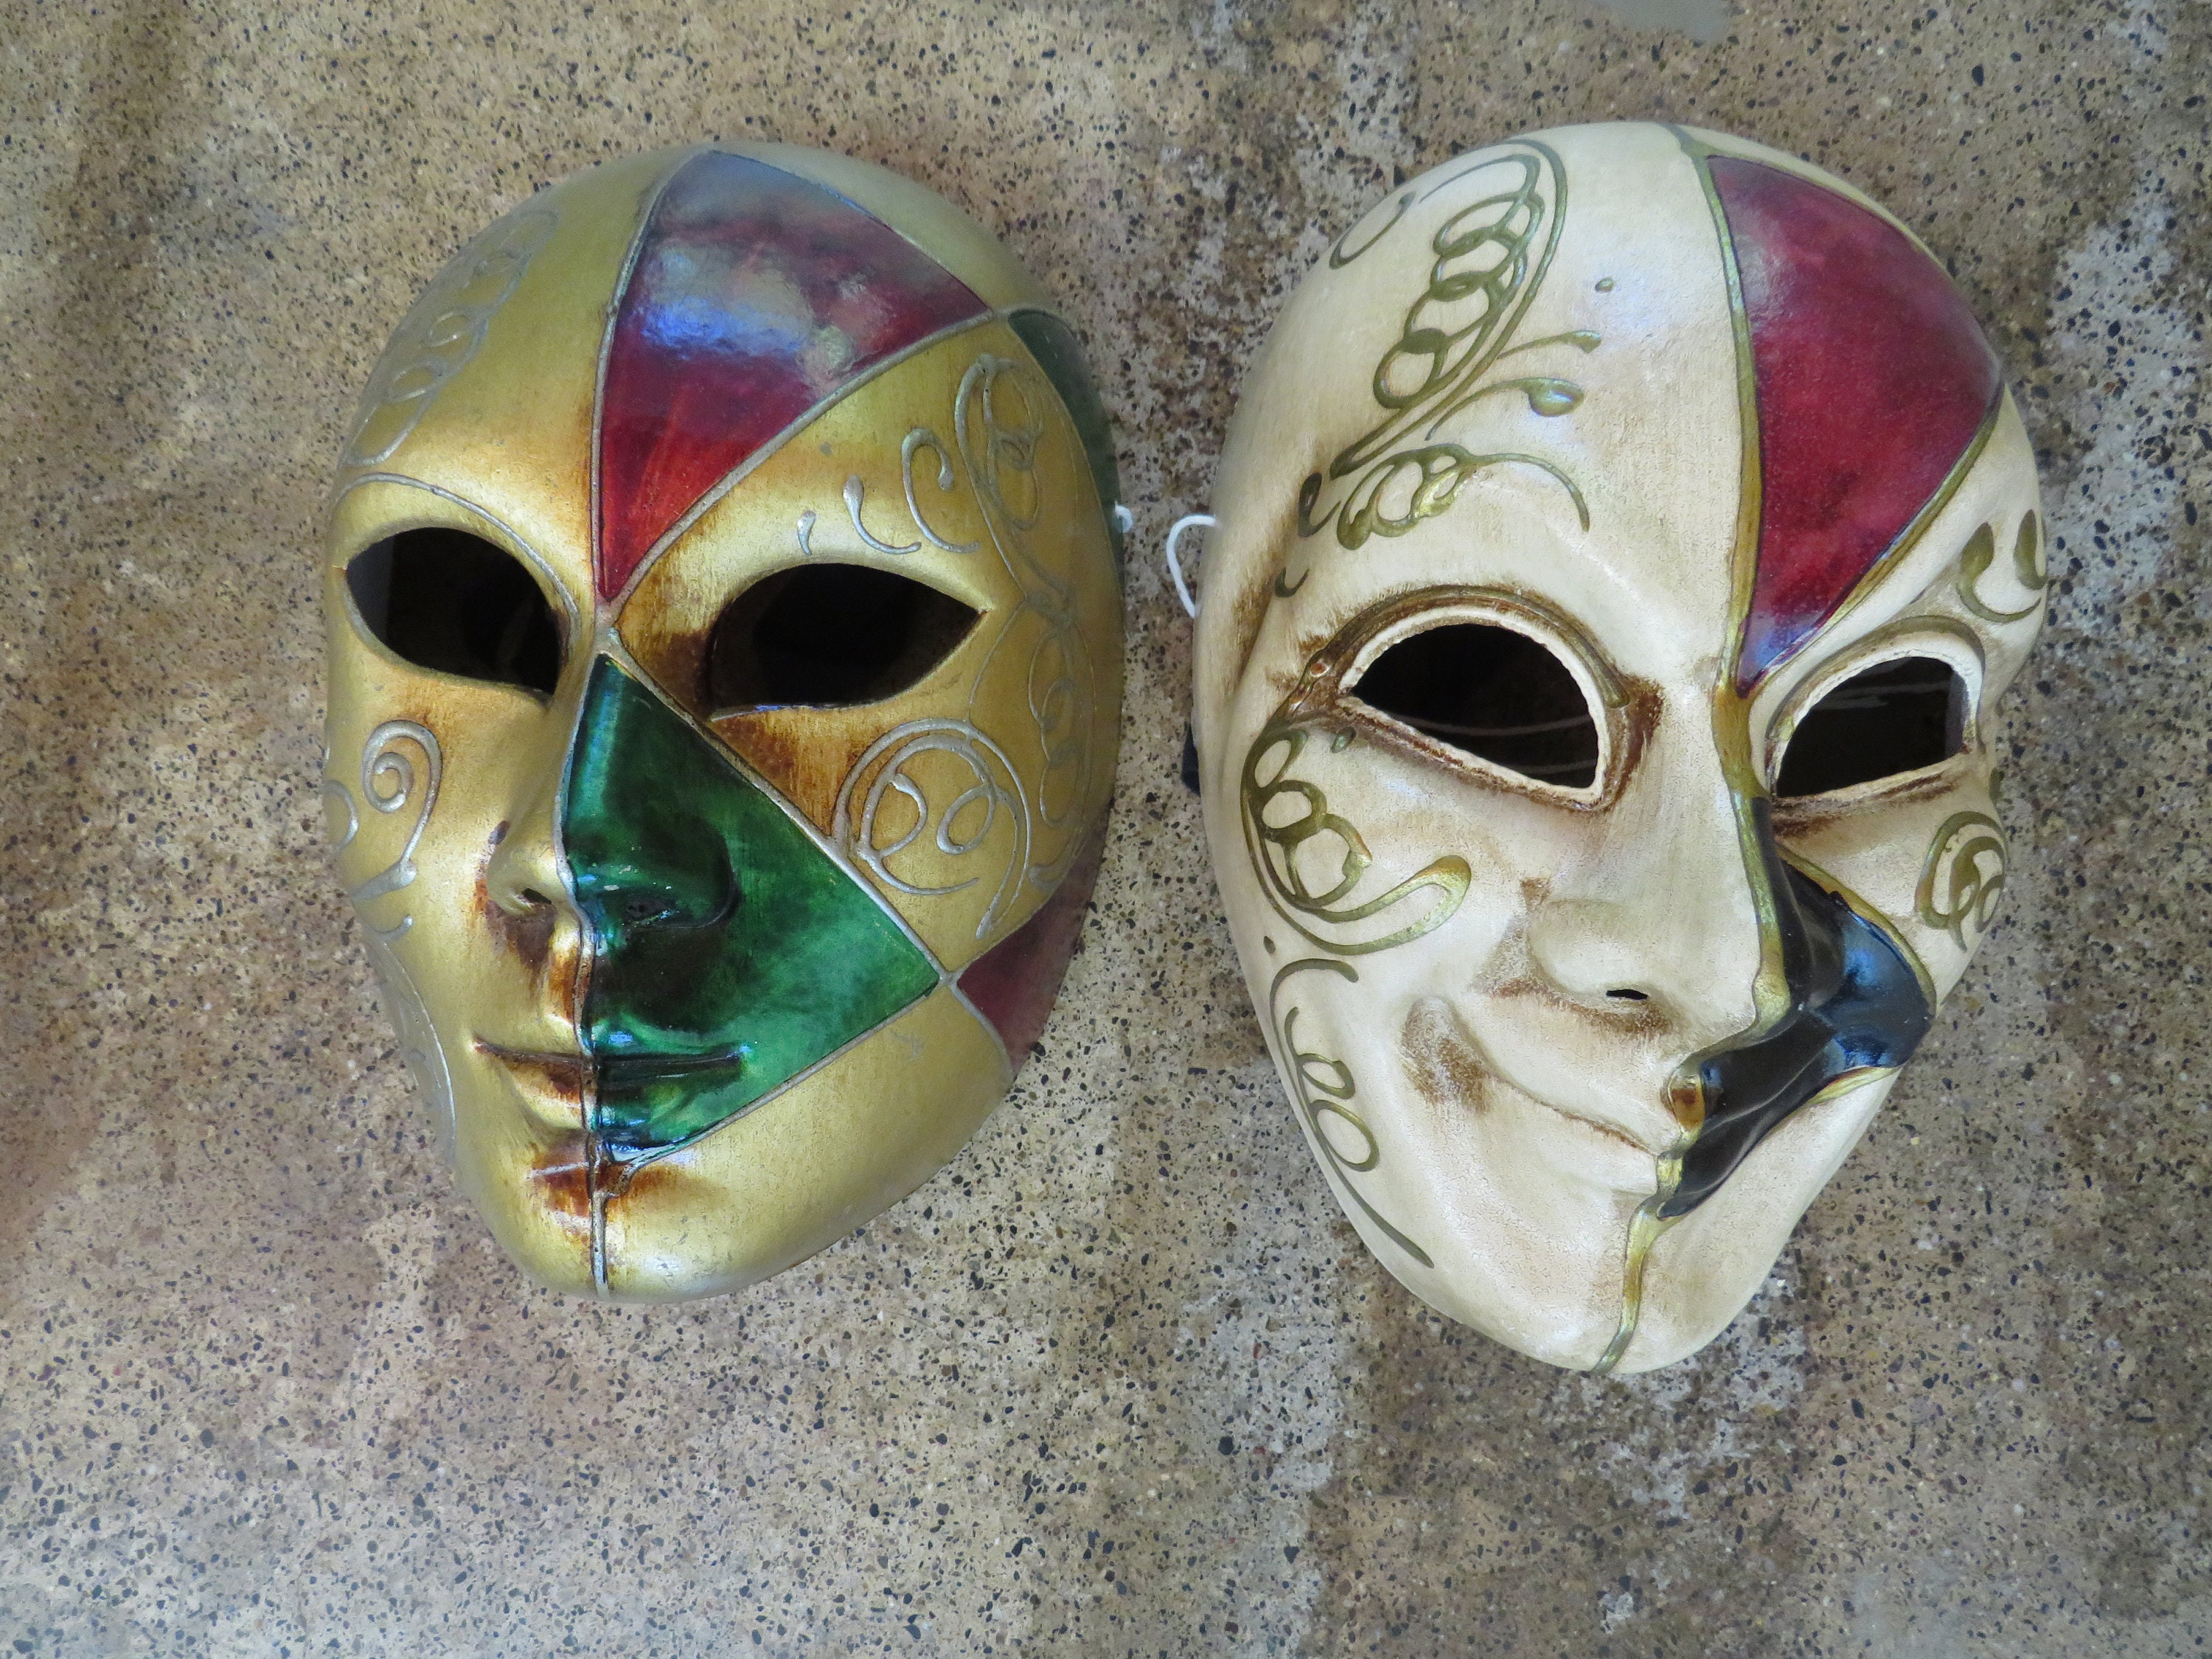 Laguna Hand Painted Masks Made in Italy Set of 2 Masks Venice Tourist Art  Home Decor Art Wall Hanging Italian Costume Party Venice Europe -   Canada